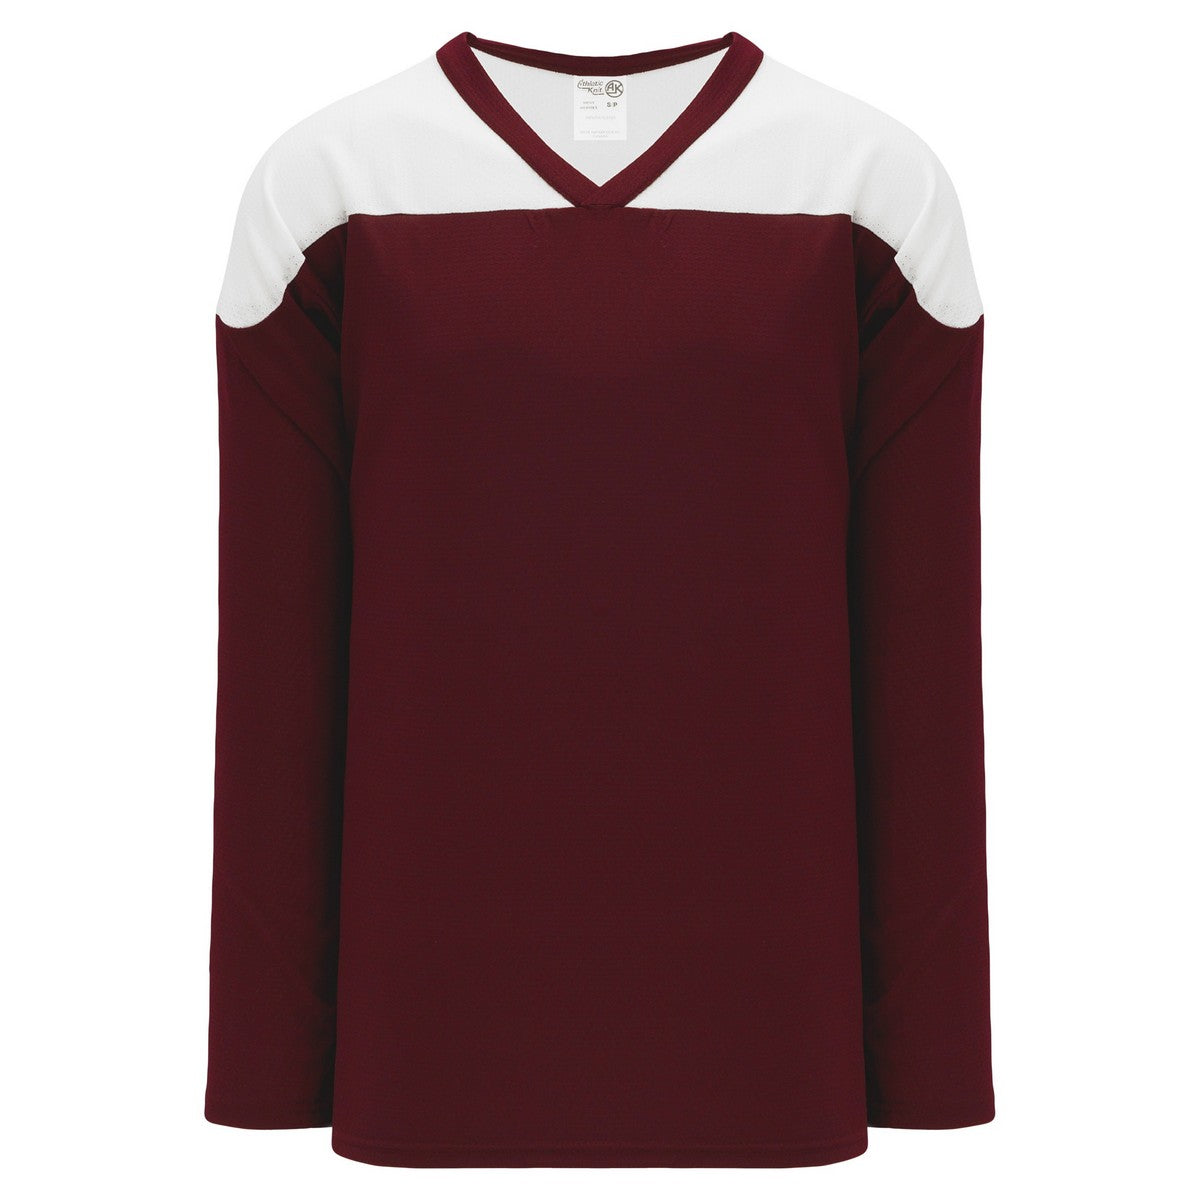 League Series H6100 Jersey Maroon-White